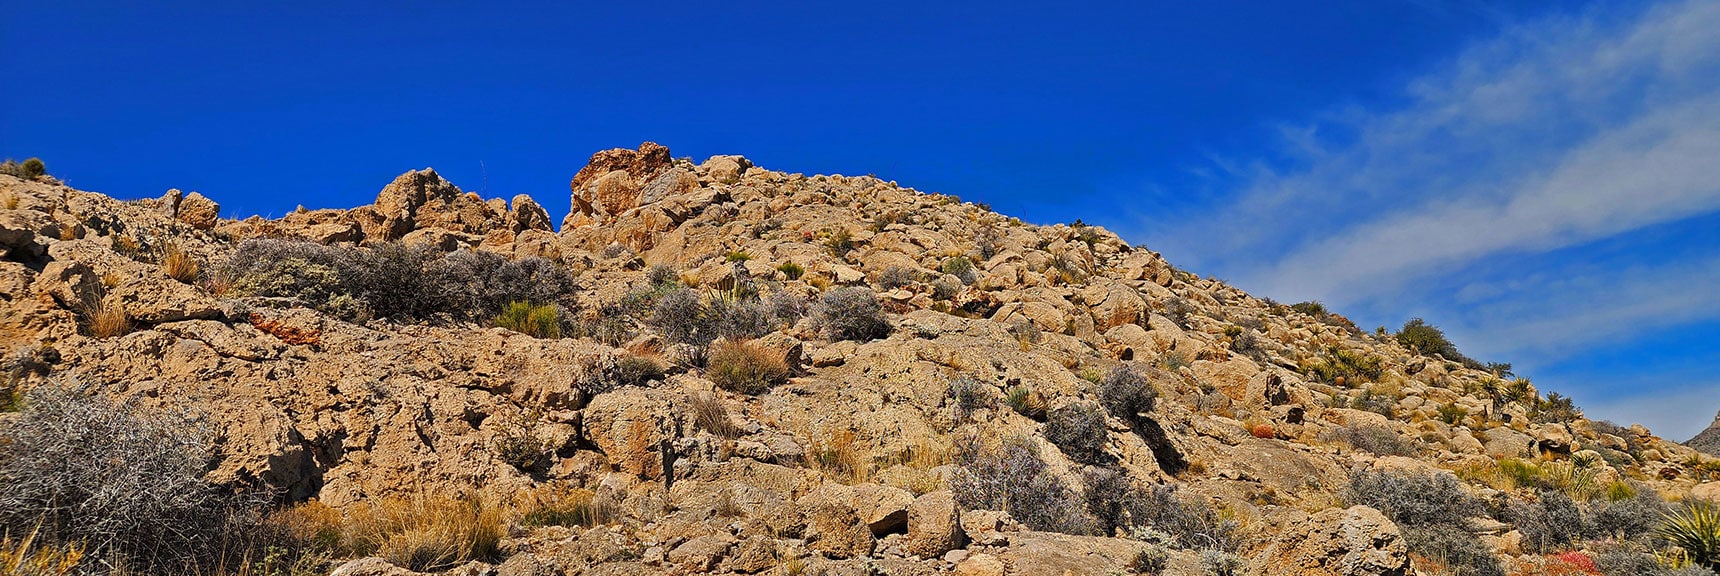 Easily Weave Your Way Through Boulders, Circle Right Side of Reddish Boulder Ahead. | Gray Cap Ridge / Brownstone Basin Loop | La Madre Mountains Wilderness, Nevada